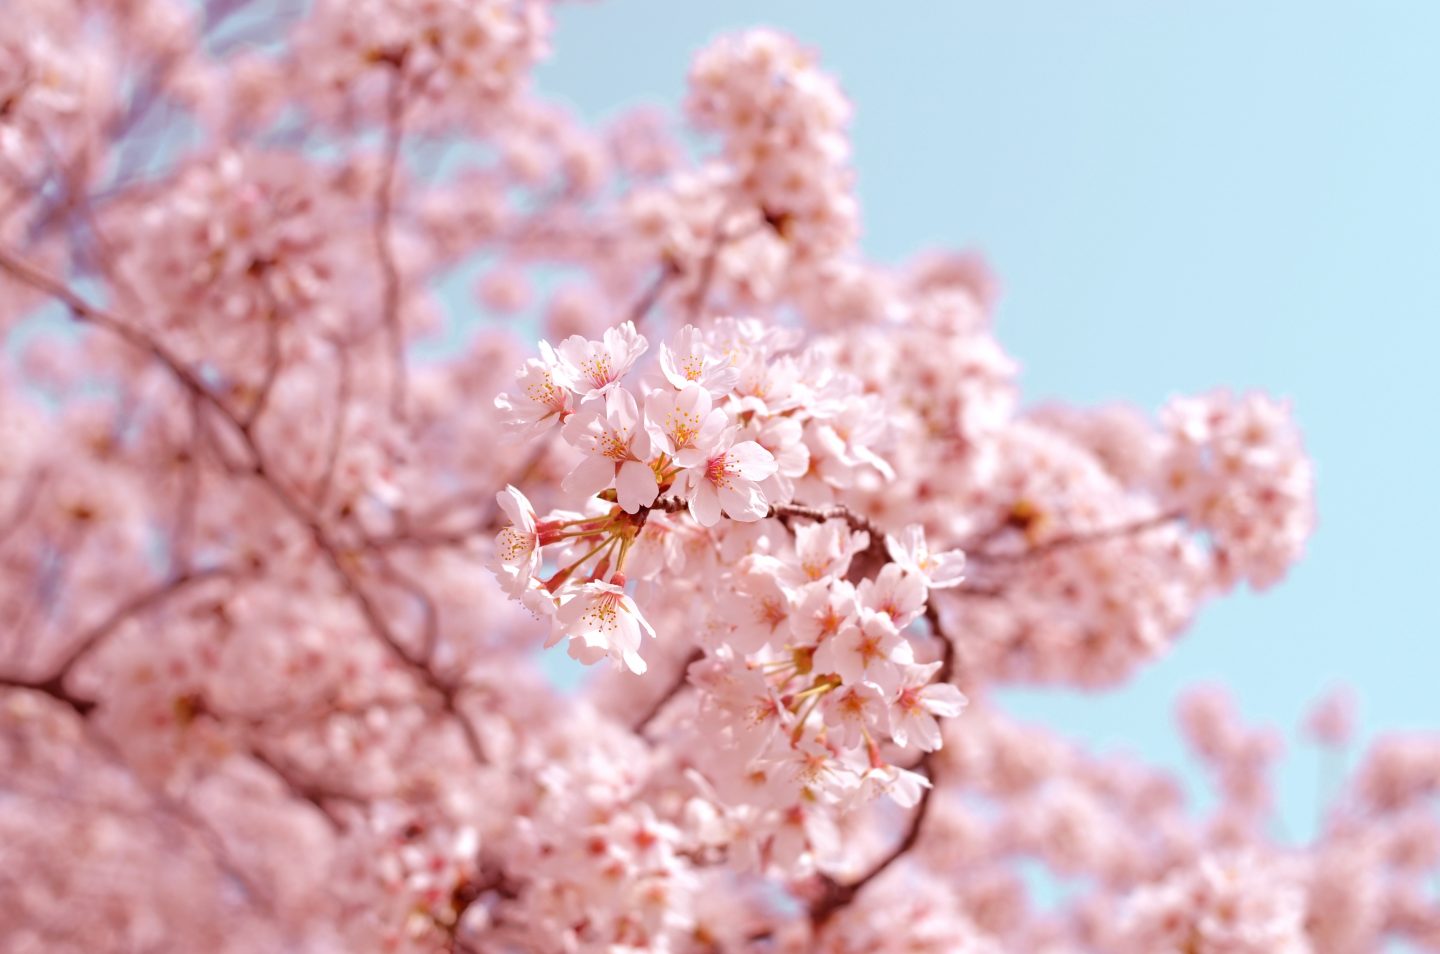 At an Alpha meeting, a lady told Zarah: "Winter is over and the season of cherry blossoms has come for you. You will become a big tree of cherry blossoms for Him, in a beautiful season." Photo by AJ on Unsplash.